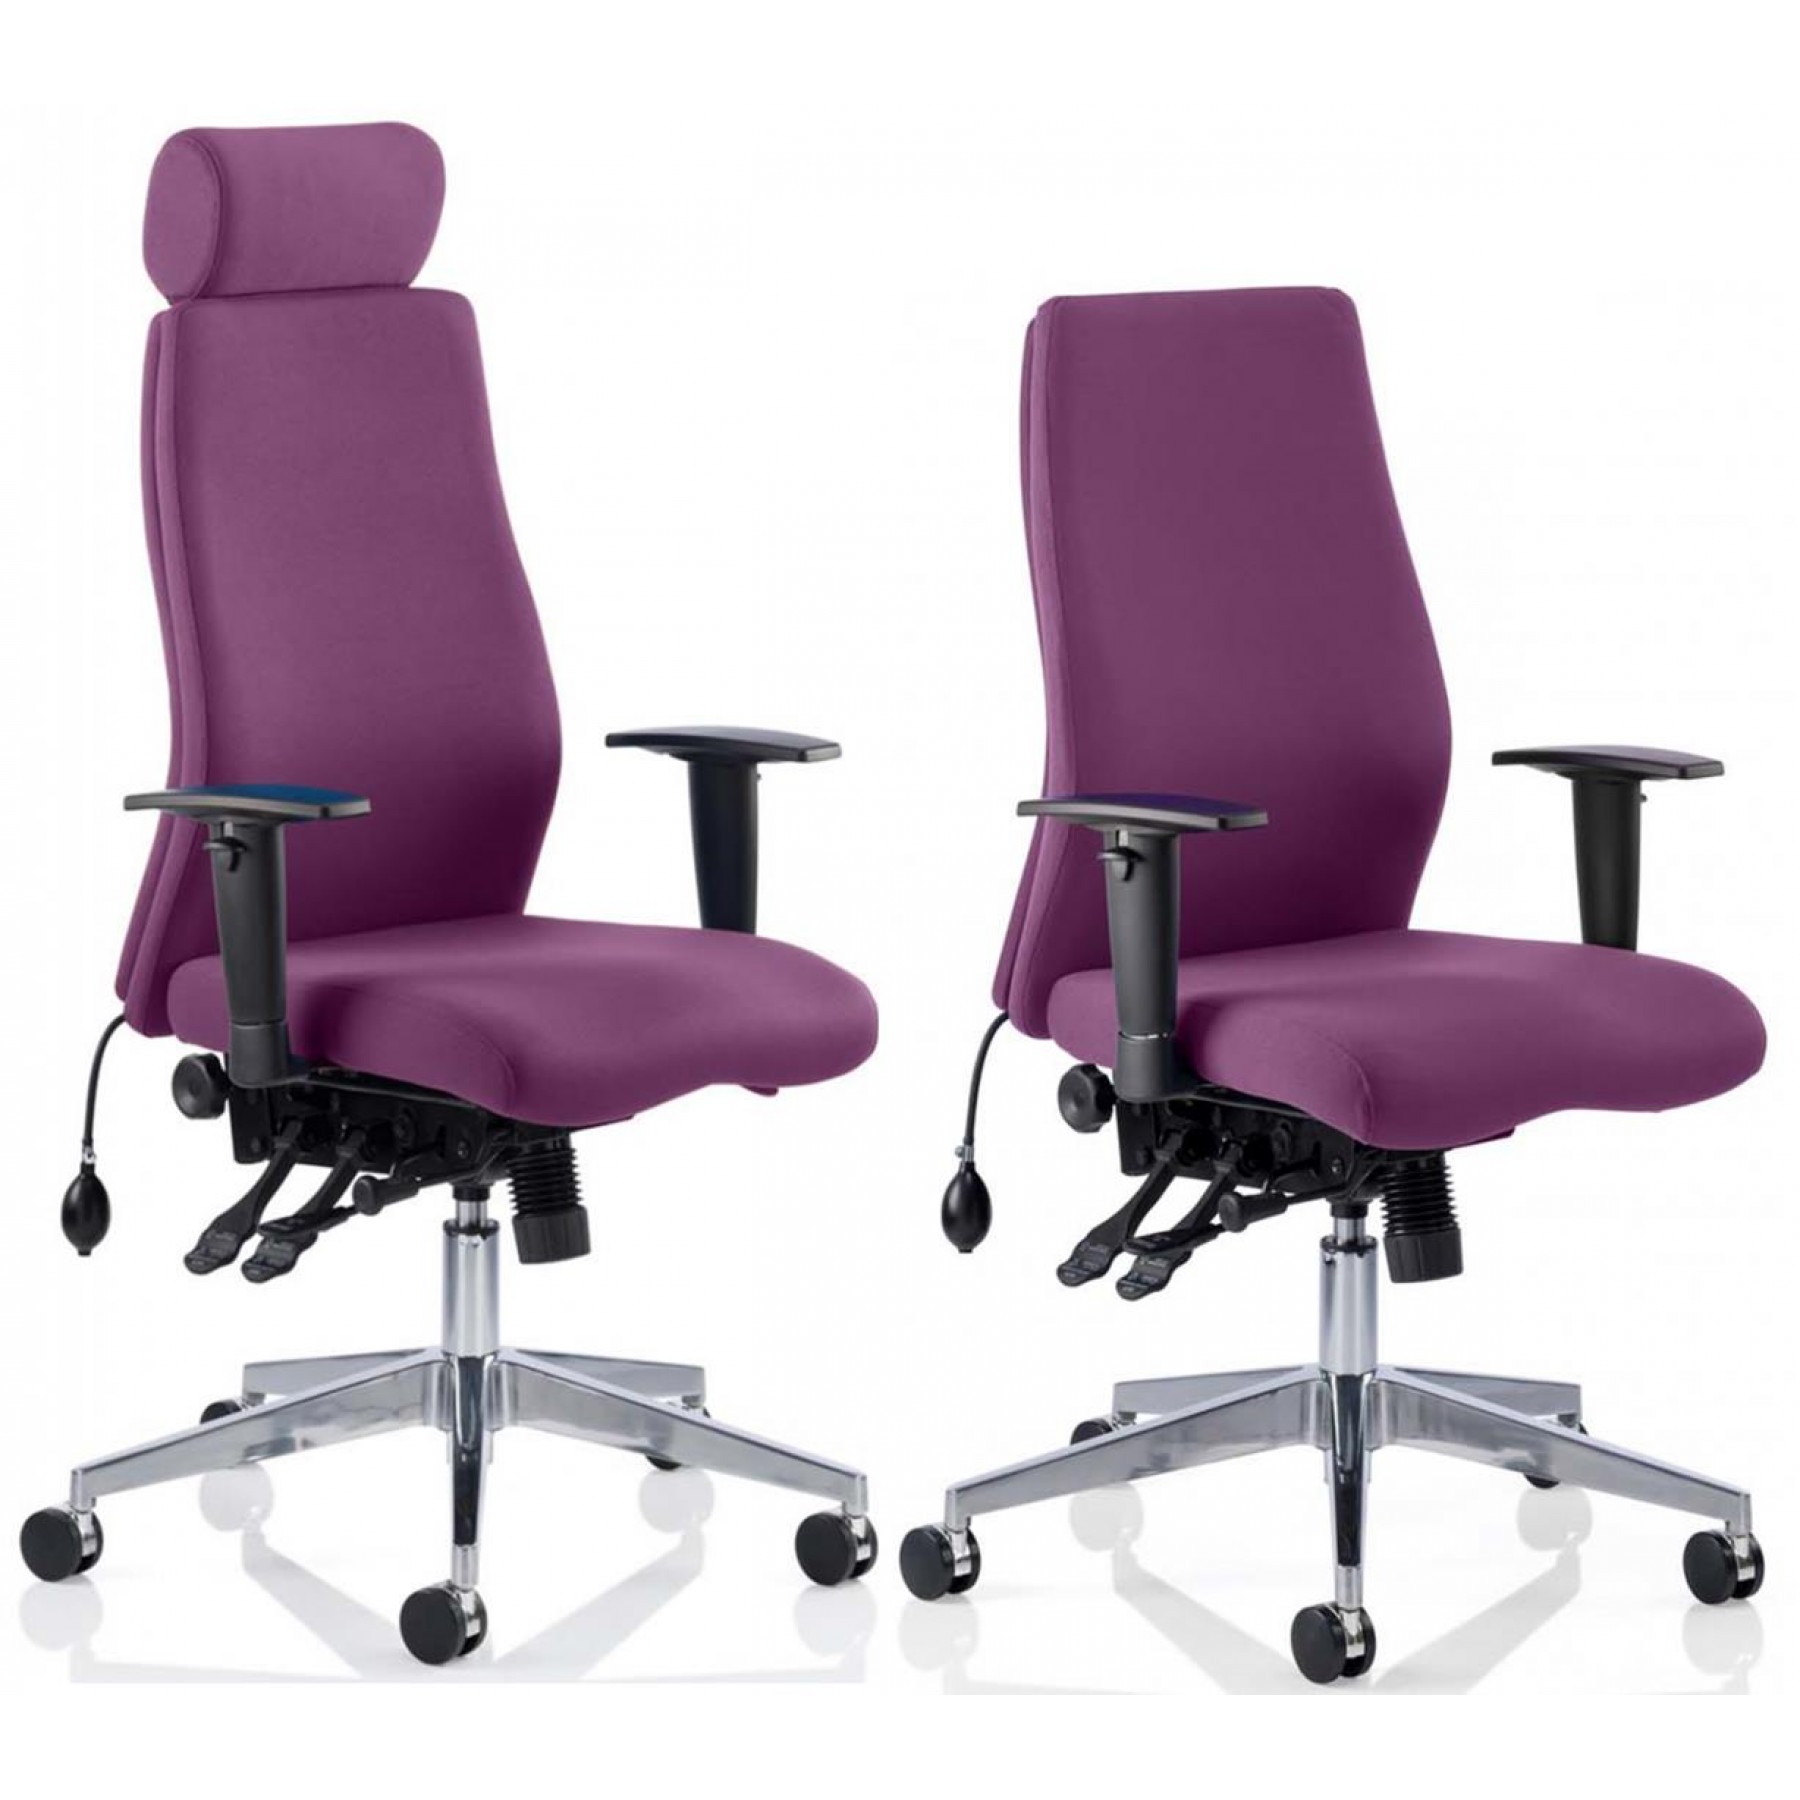 i-Curve Bespoke Chiropractor Posture Office Chair